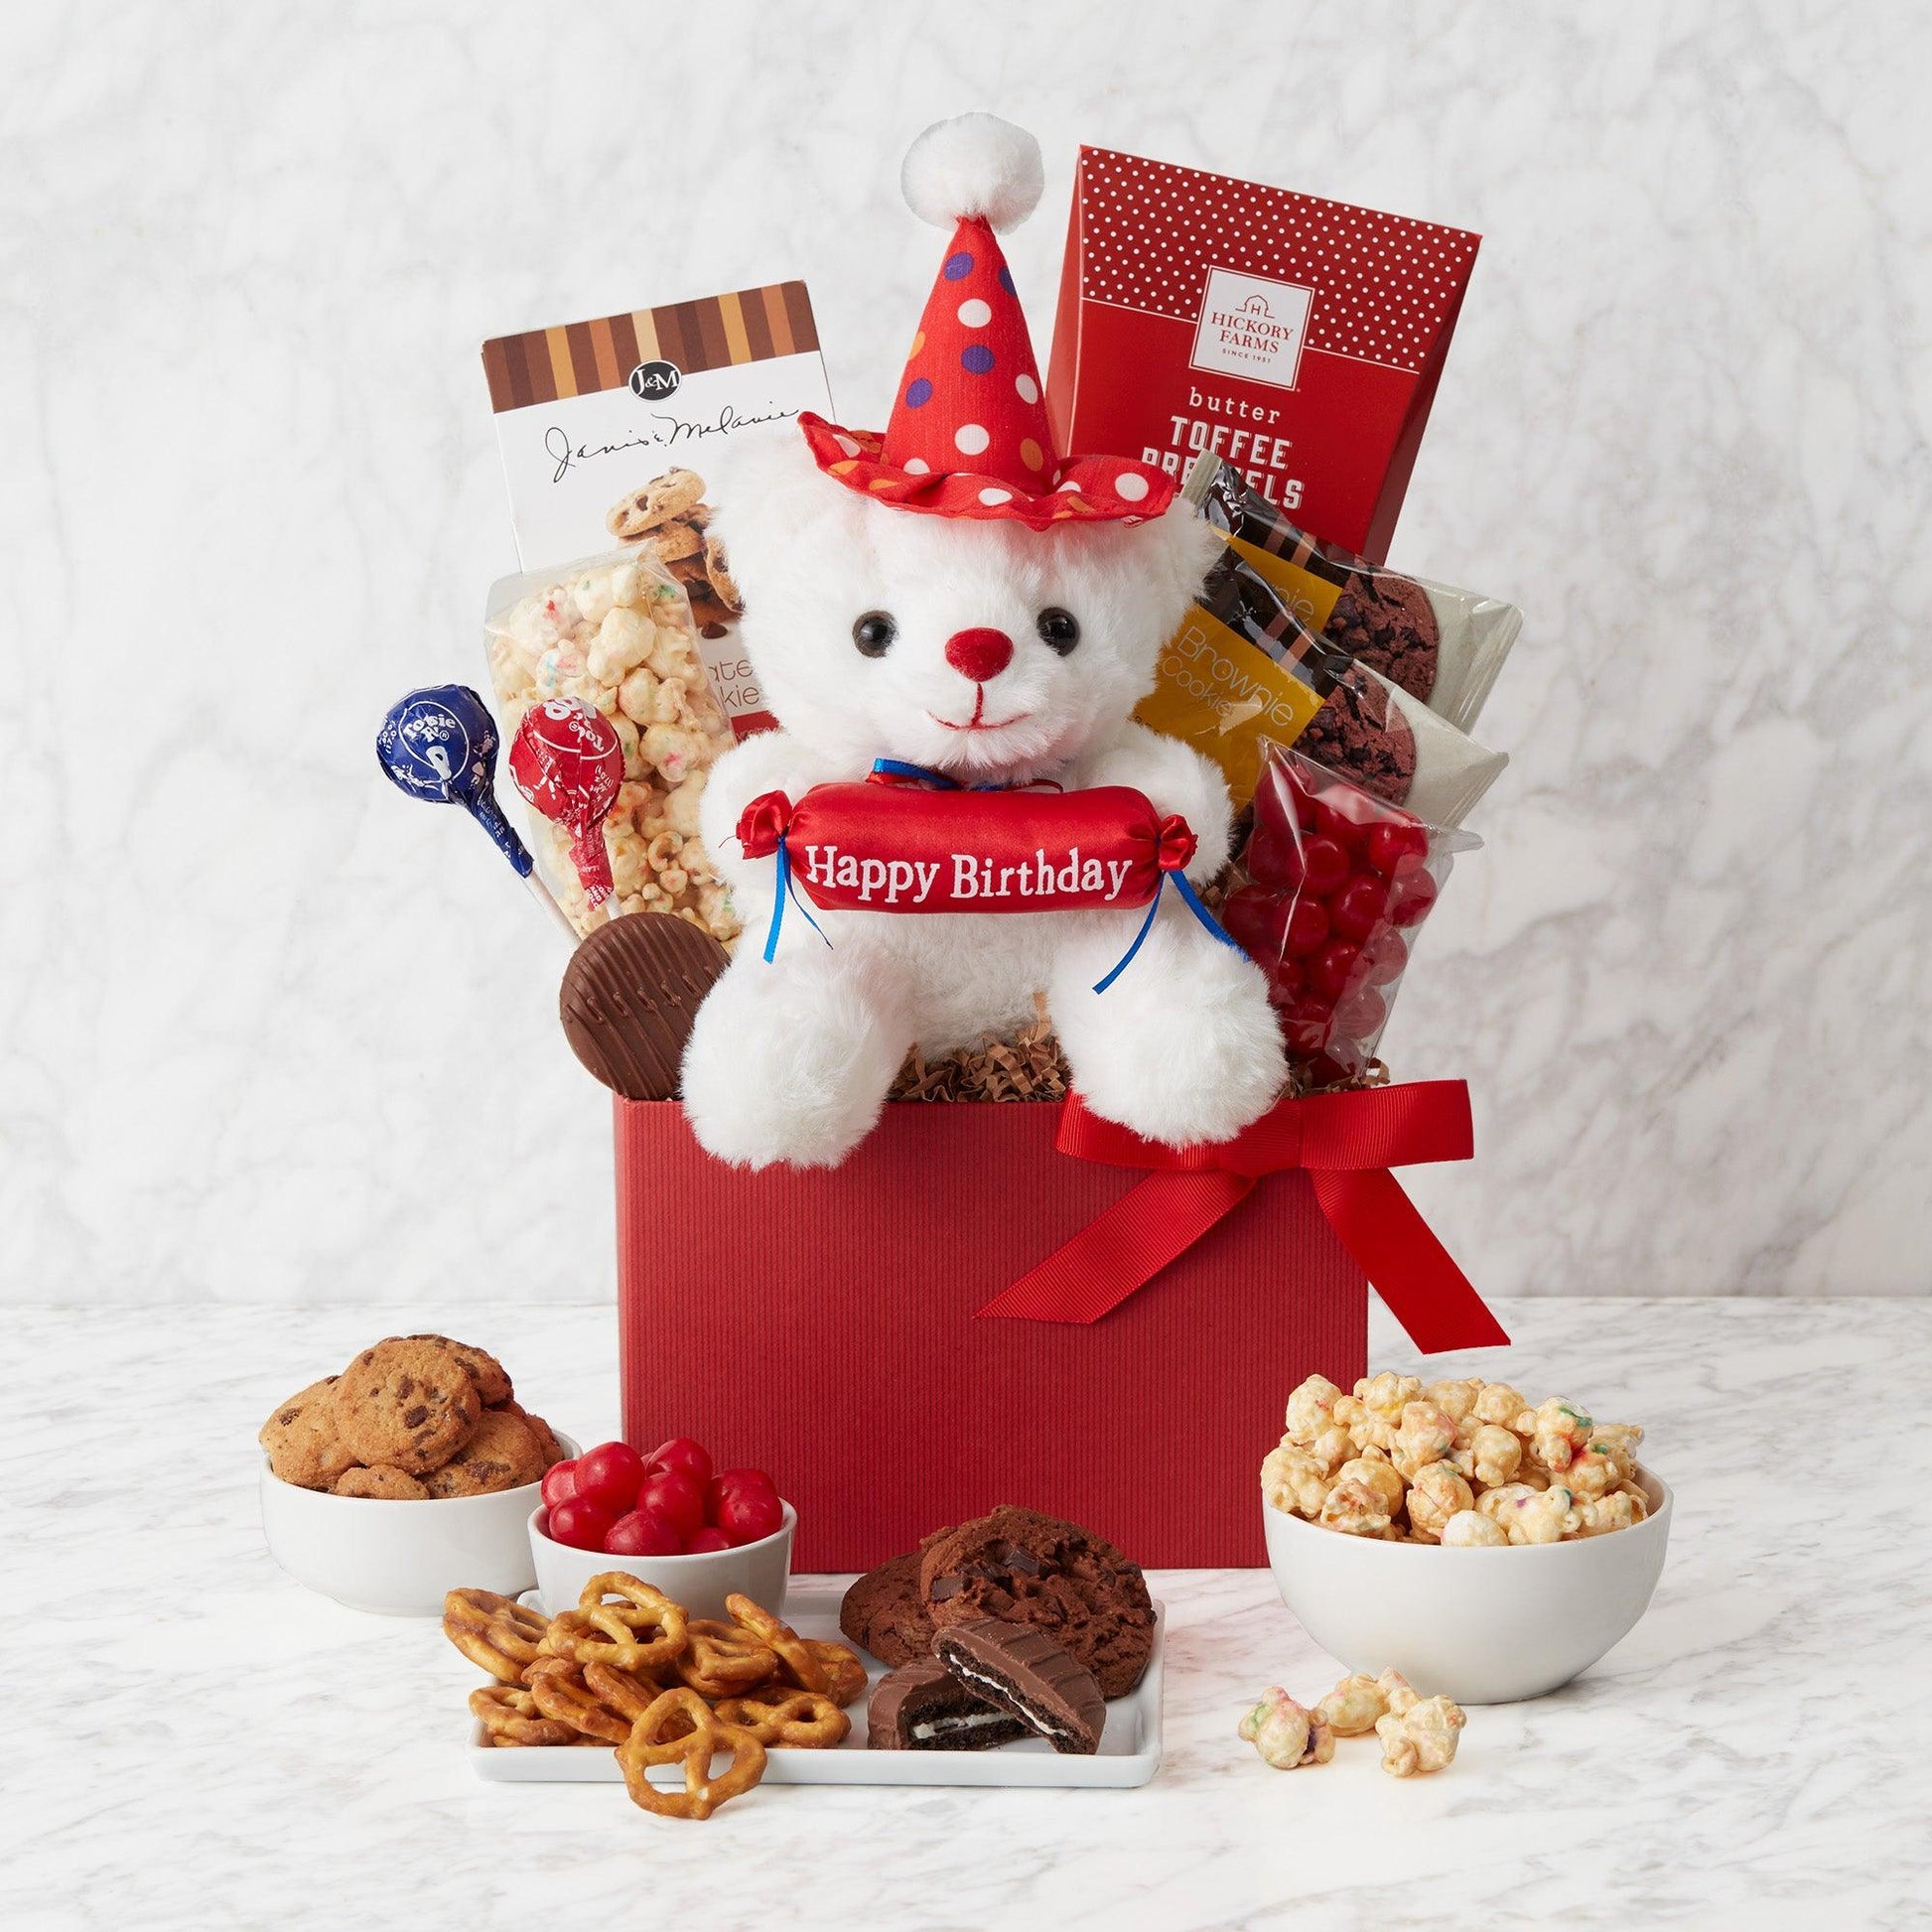 Birthday Bear of Warmth Gift Box - Looking for a gift to celebrate that special birthday? They'll love this collection of treats and goodies that’ll make them feel spoiled. And the adorable birthday bear makes this box even more sweet and celebratory.